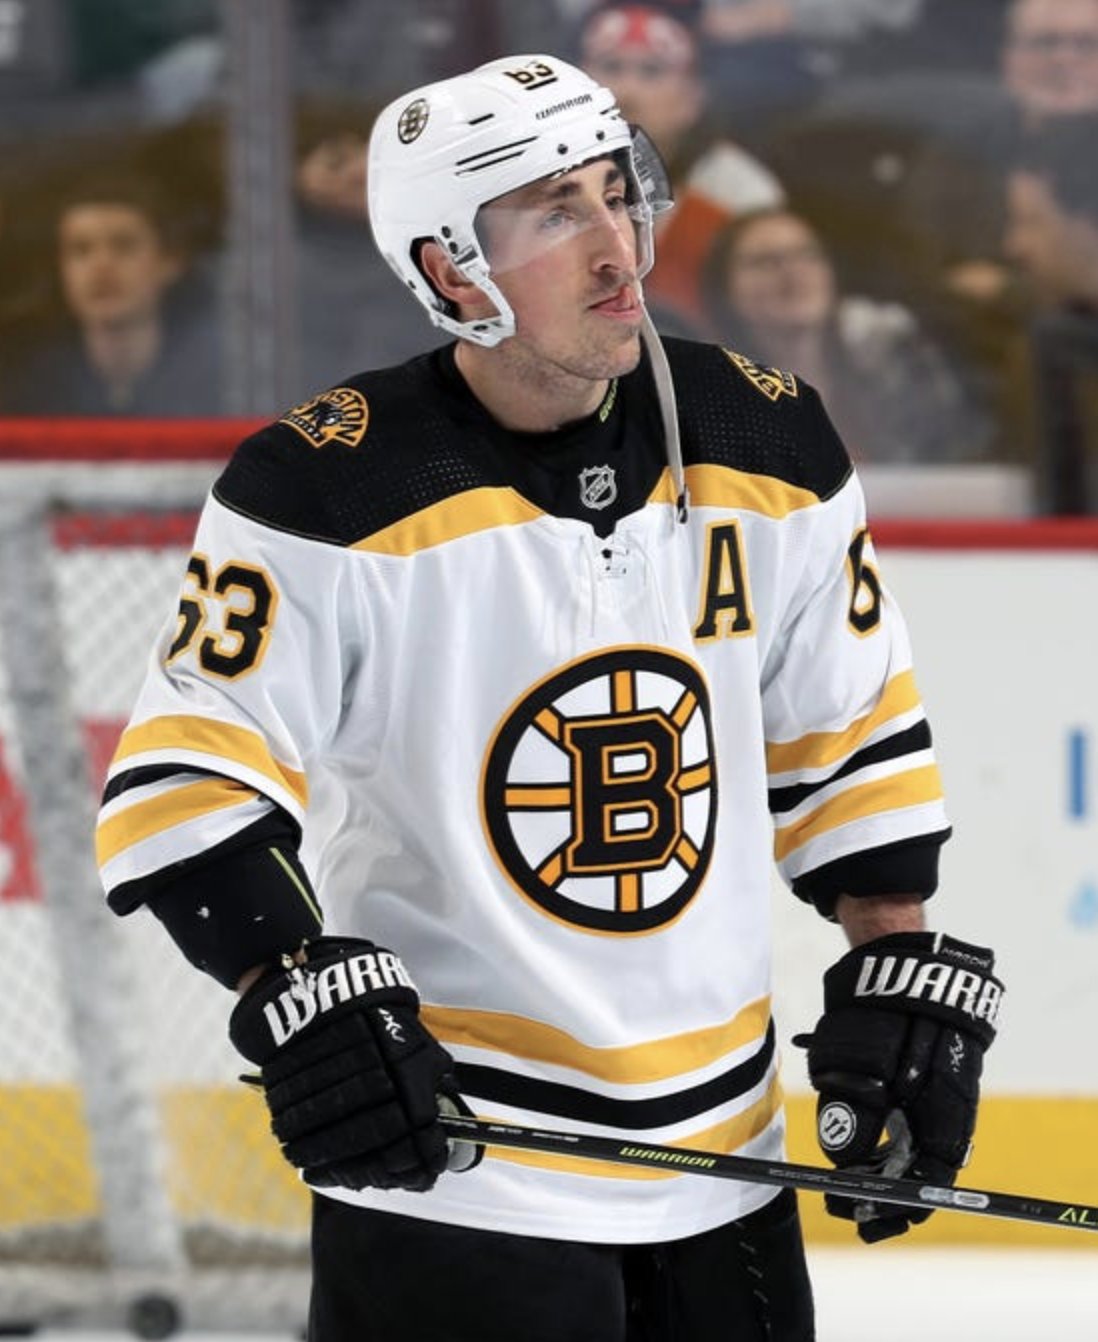 Looks like Marchand is using his black gloves with some kind of